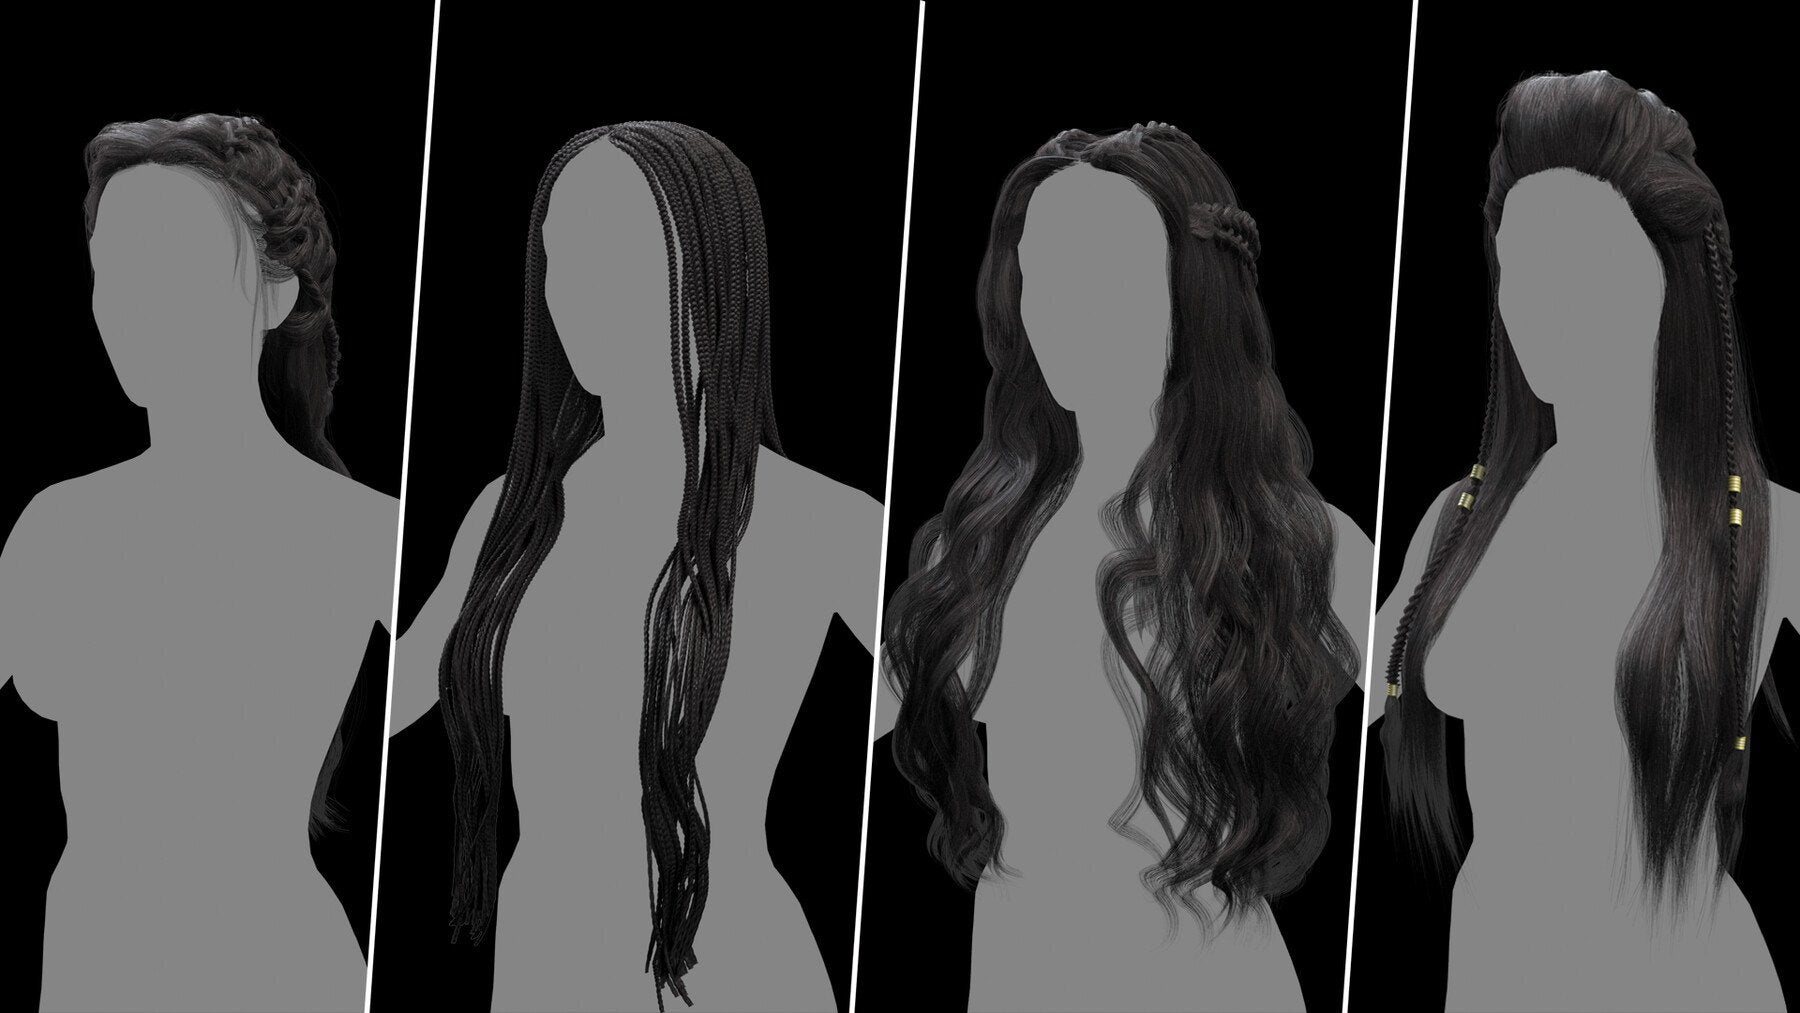 40 Female Hair Cards Collection